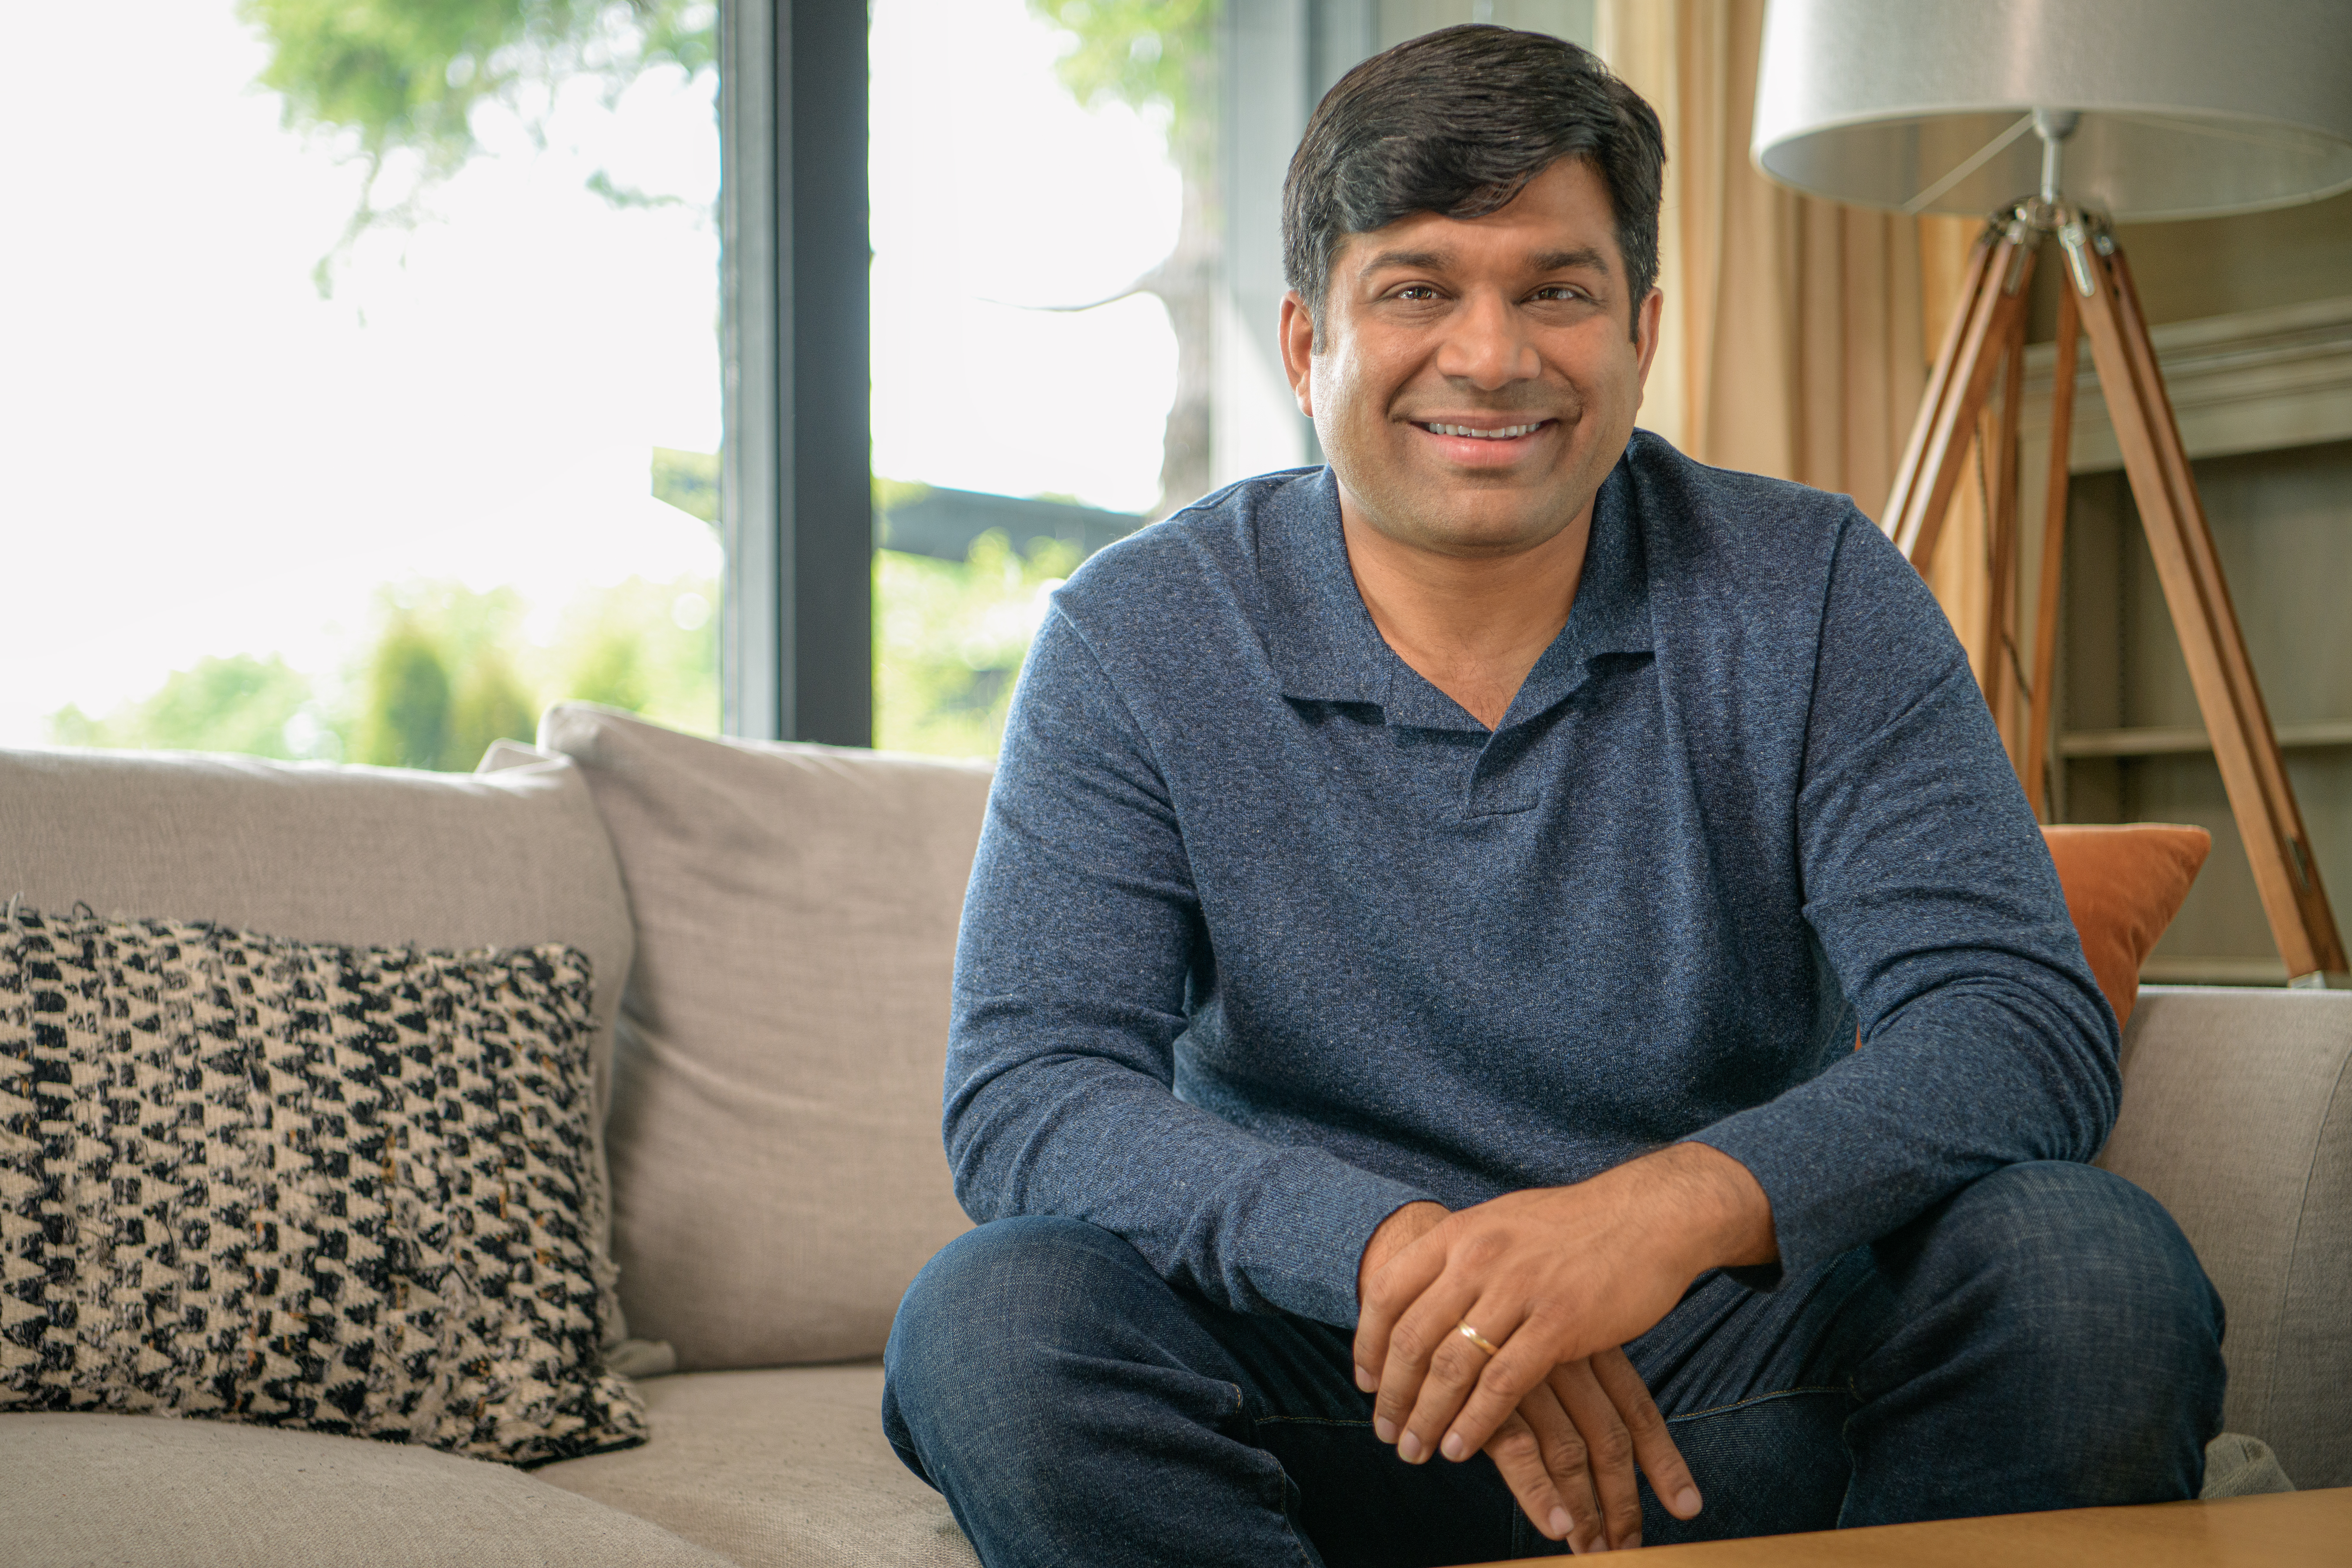 Co-founder Tushar Garg sitting on a couch and smiling into the camera.